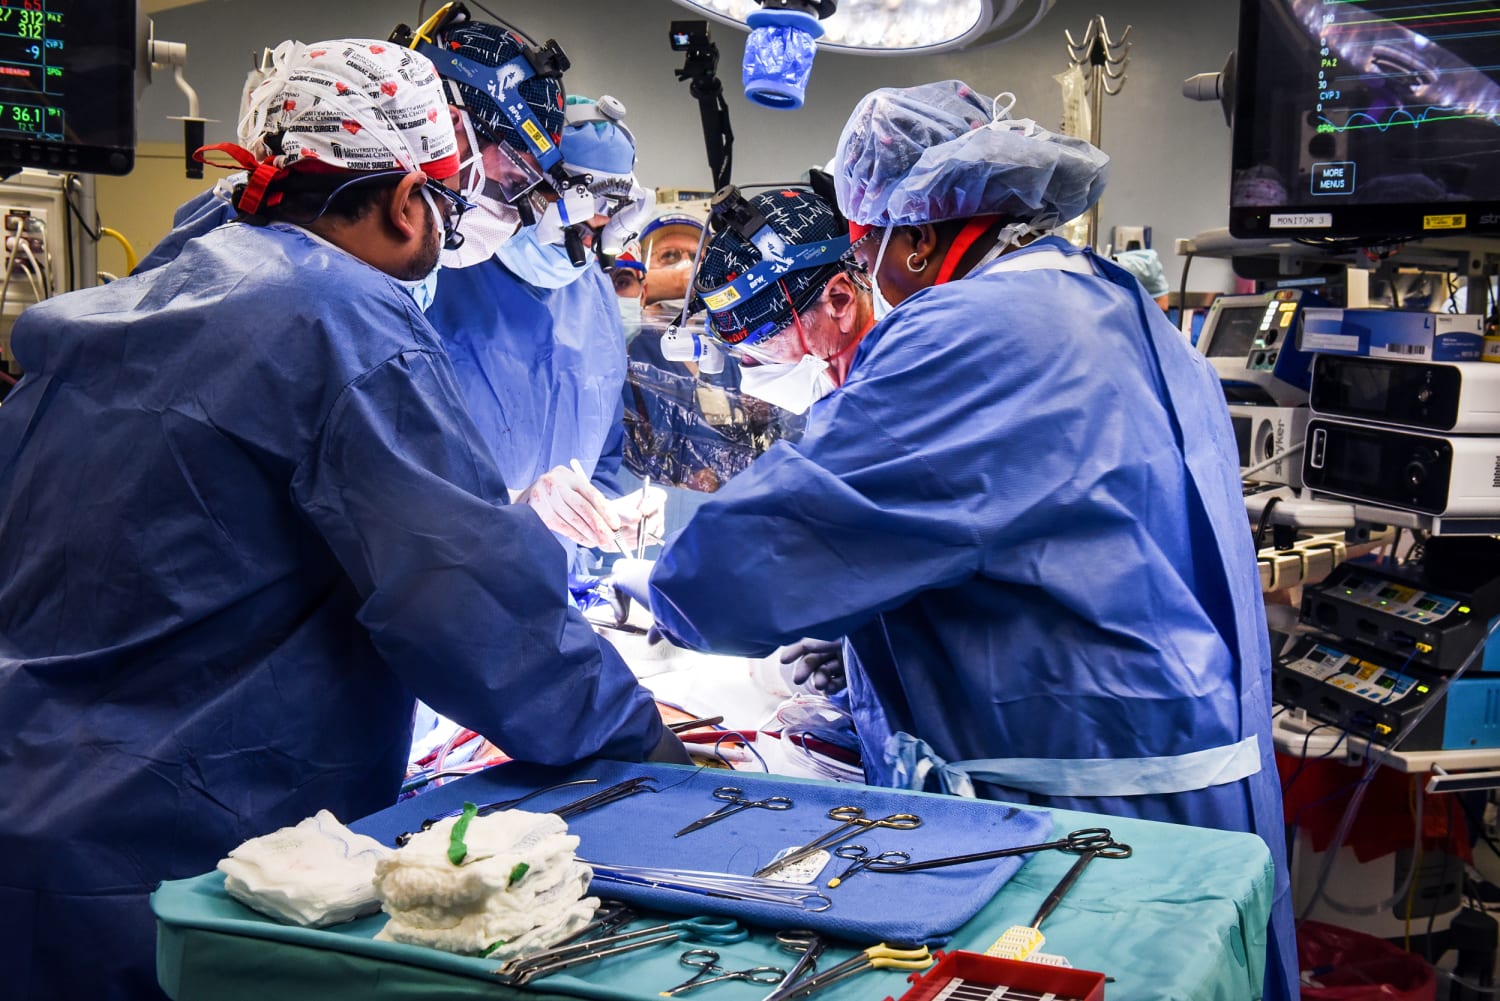 Surgeons perform first successful transplant of pig heart to human patient